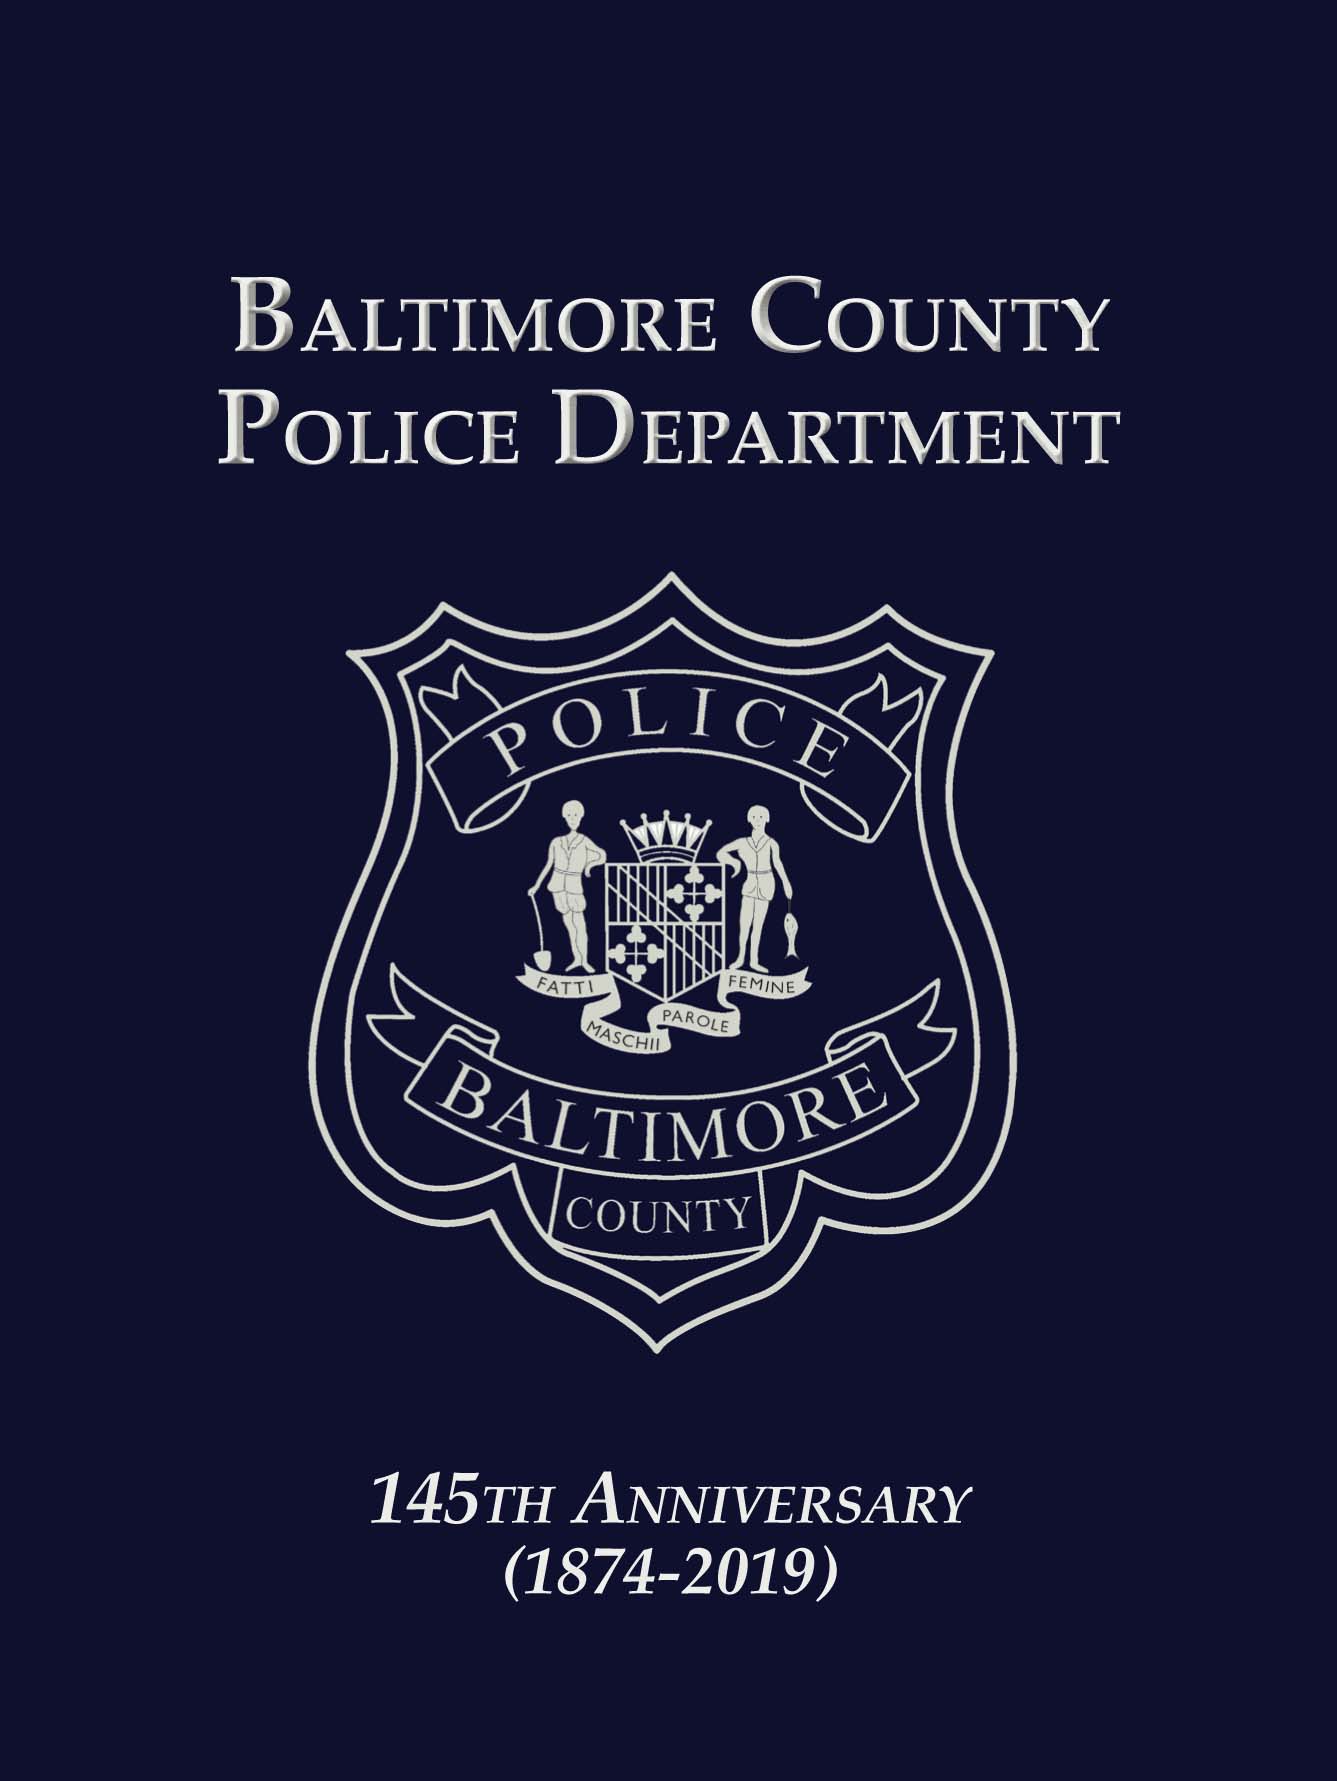 BALTIMORE POLICE Chronology of Badges by Lucas